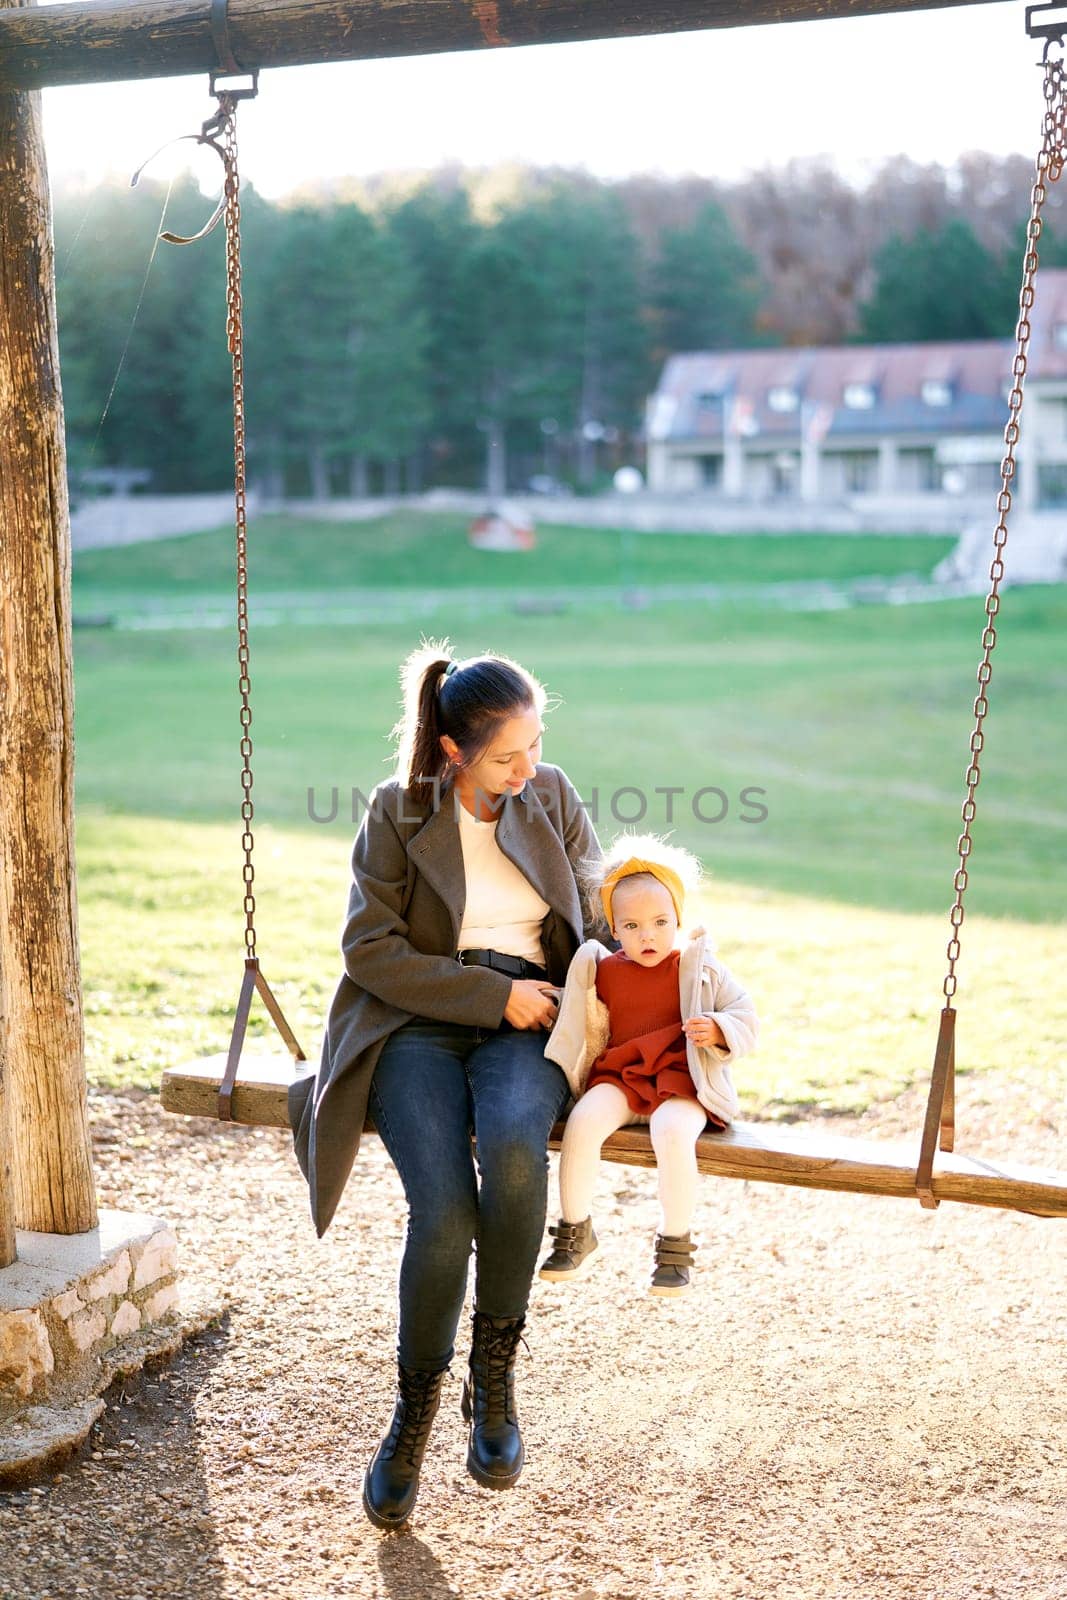 Mom hugs a little girl sitting with her on a wooden chain swing in the park by Nadtochiy